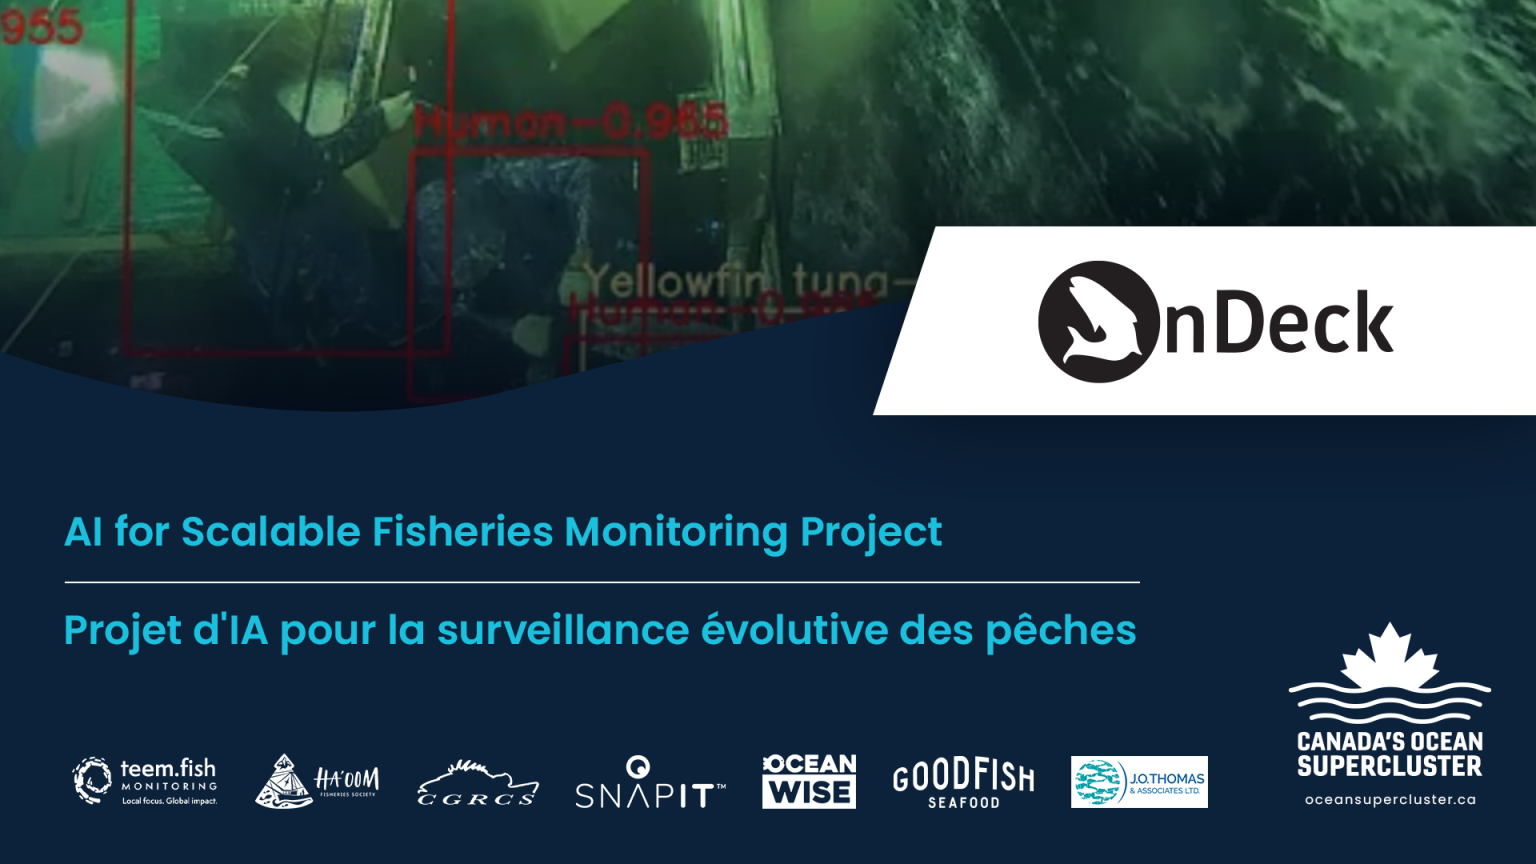 Canada’s Ocean Supercluster announces AI for Scalable Fisheries Monitoring Project